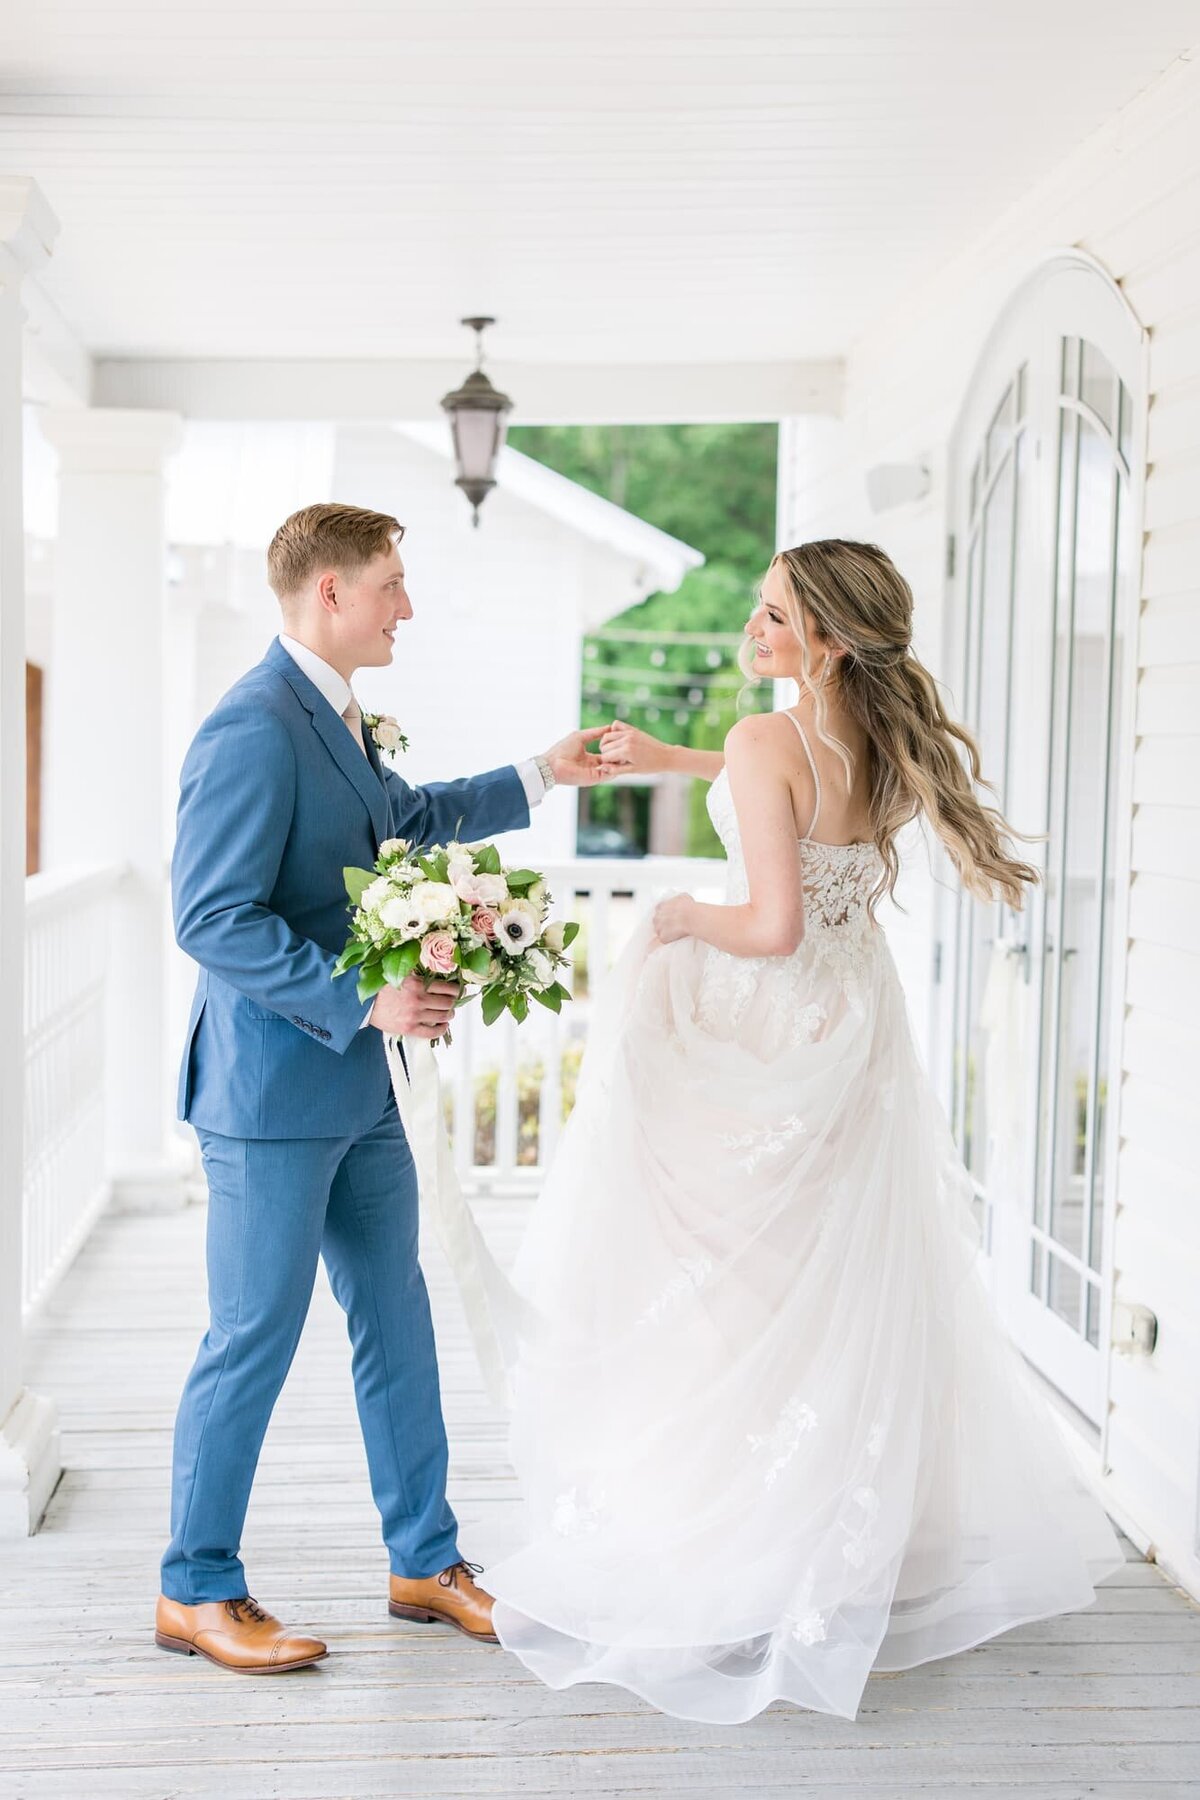 Katie and Alec Wedding Photography Wedding Videography Birmingham, Alabama Husband and Wife Team Photo Video Weddings Engagement Engagements Light Airy Focused on Marriage  Samantha + Connor's Sonne_aoK1